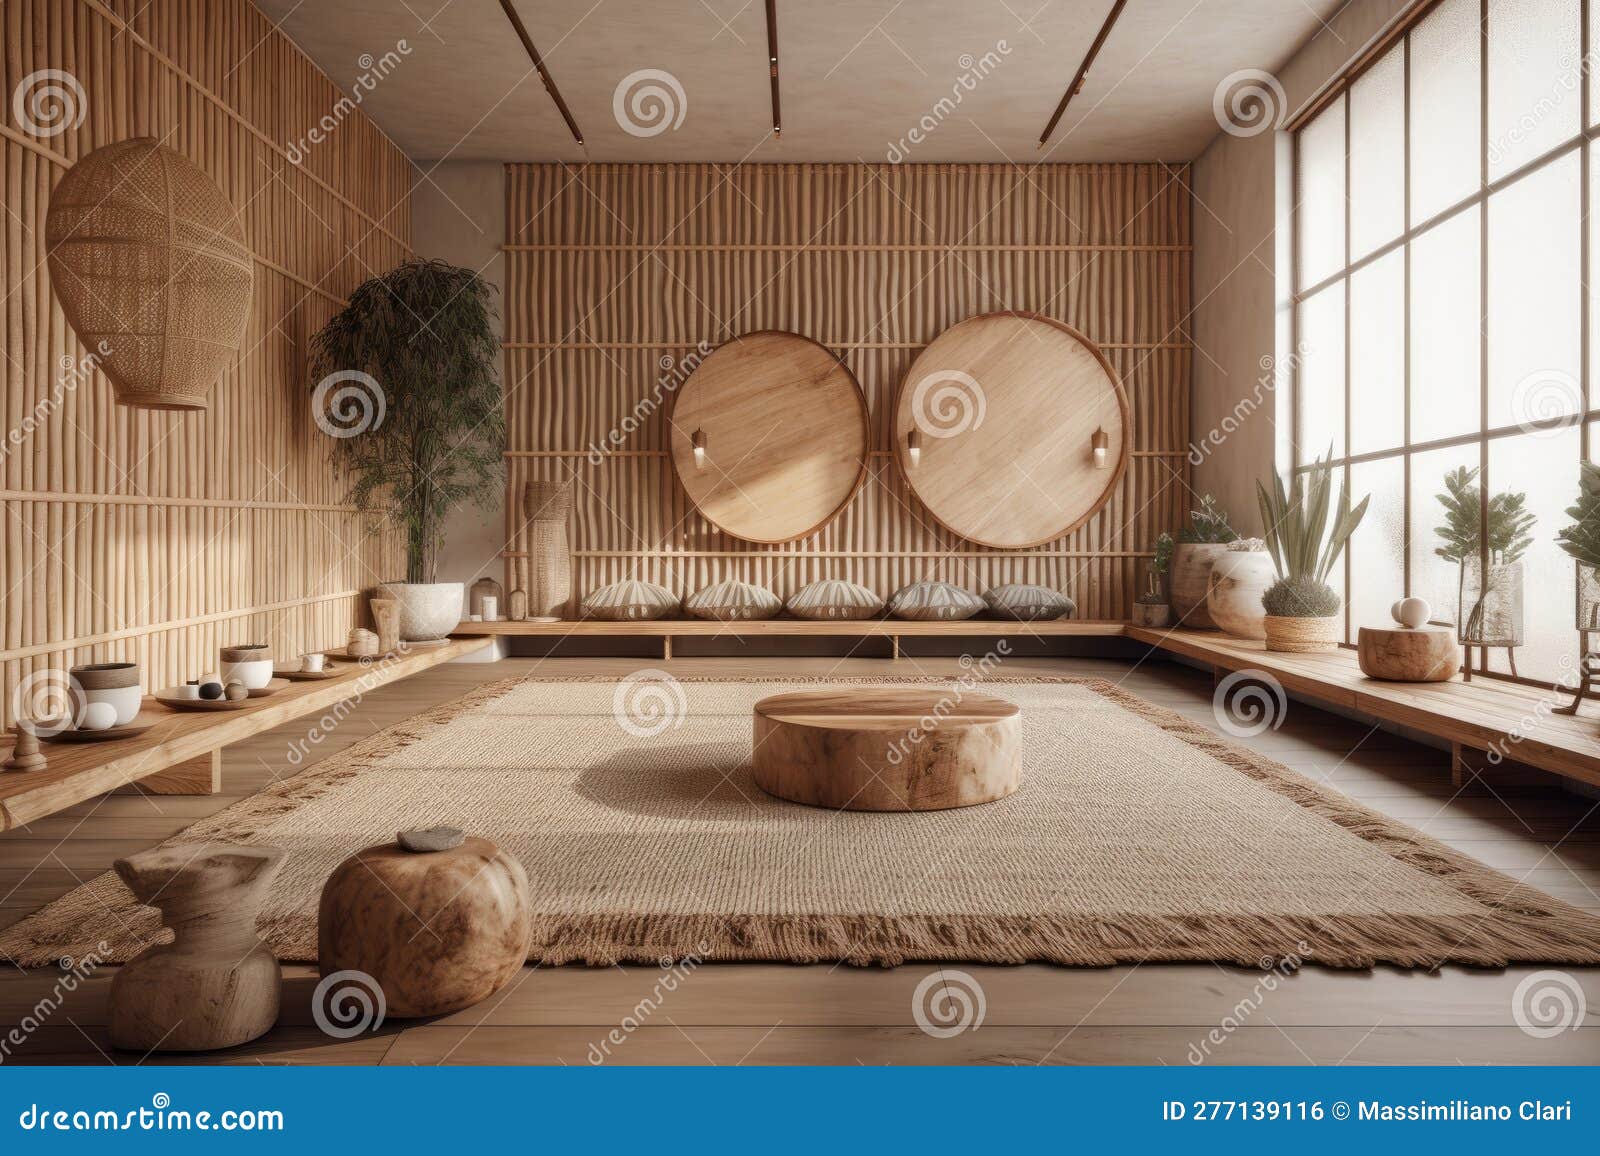 5 Interior Design Tips for Choosing the Perfect Bamboo Shades